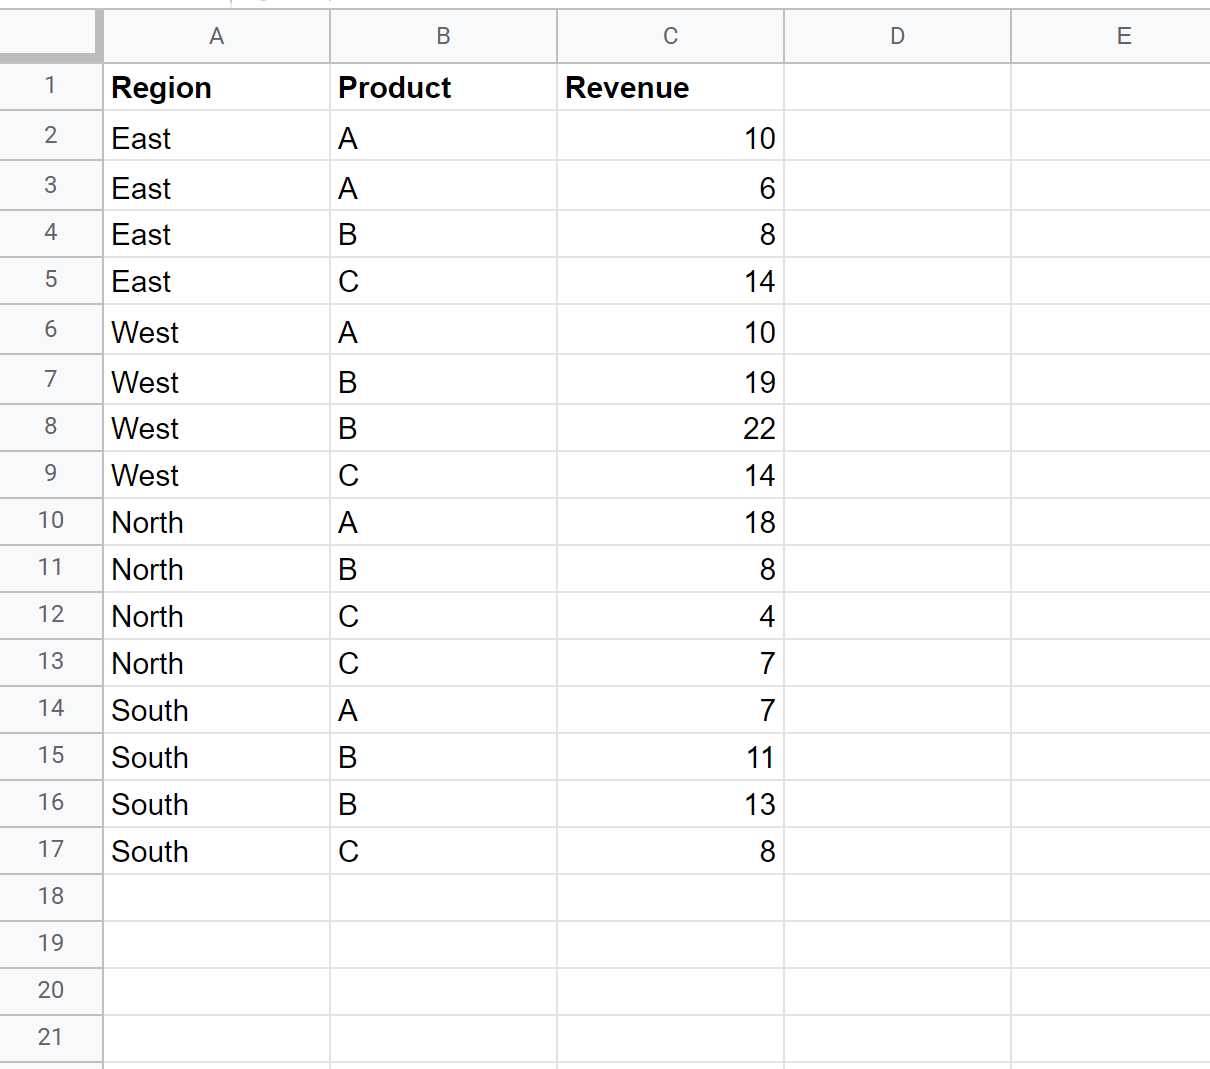 How Can I Add A Calculated Field To Pivot Table In Google Sheets